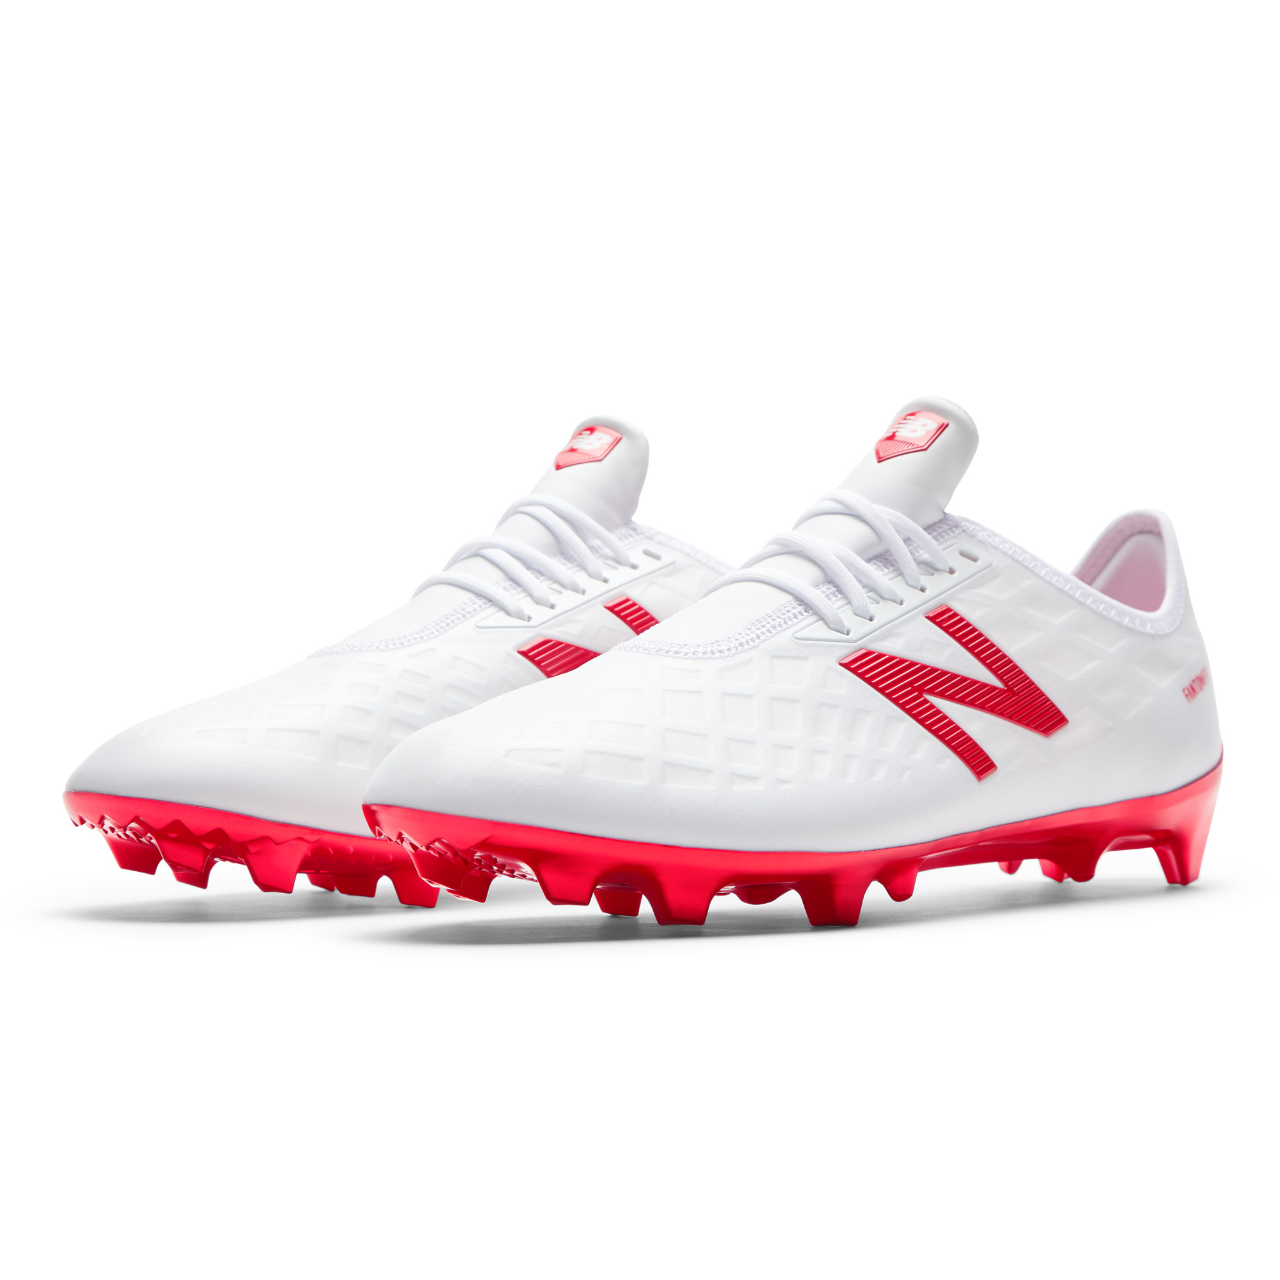 New Balance Furon 4.0 Pro Fg (WIDE) Soccer Boots - White/Flame